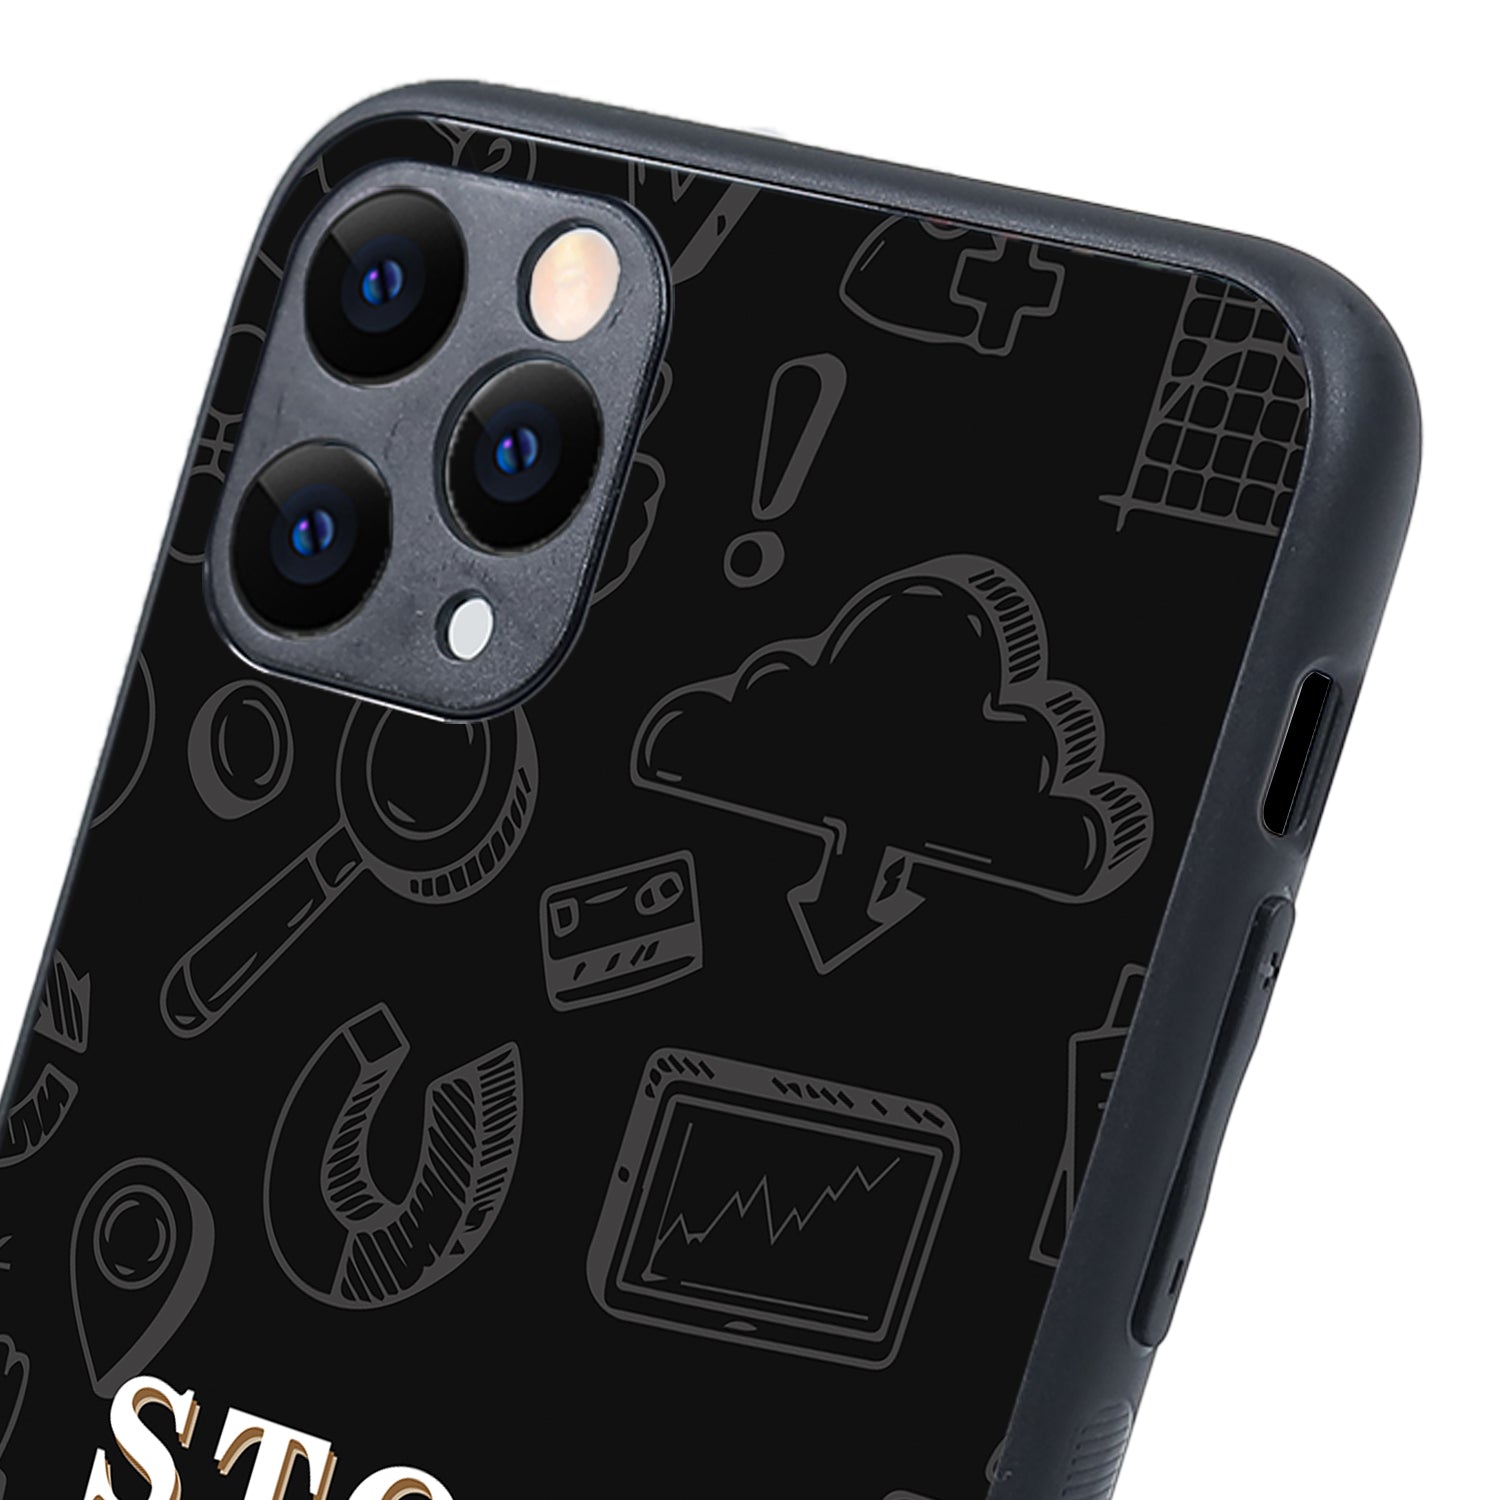 Stock Market Trading iPhone 11 Pro Max Case